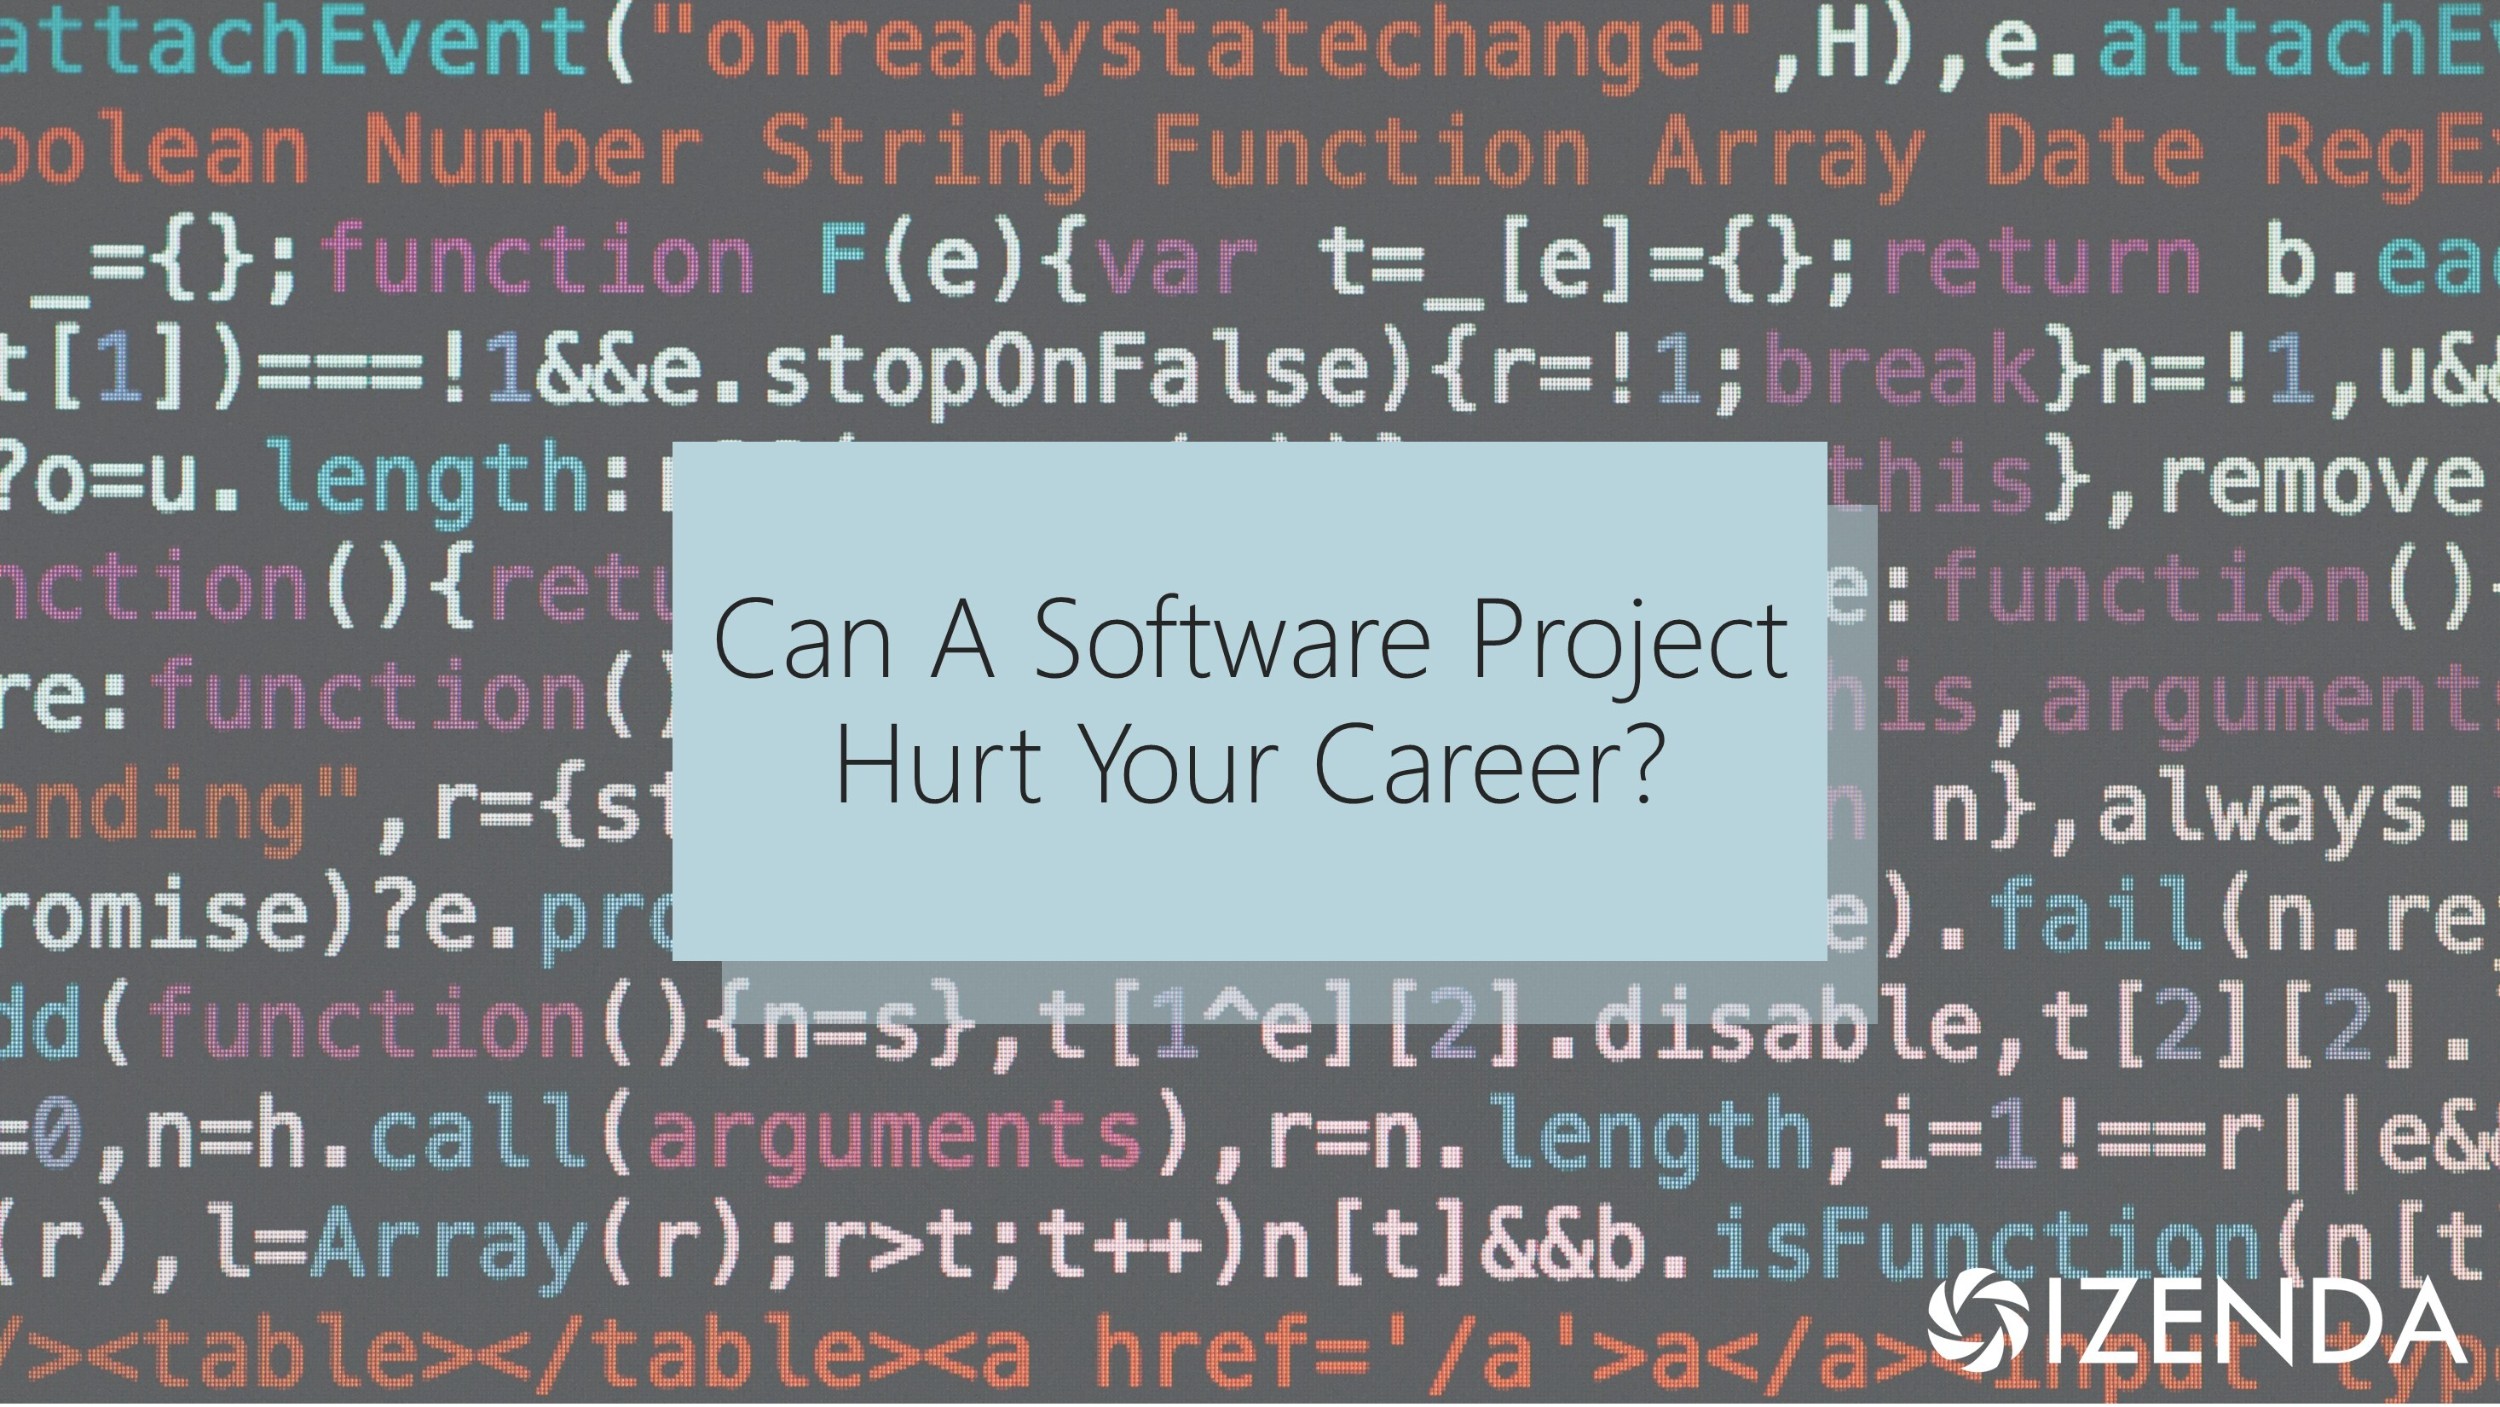 can a software project hurt your career?